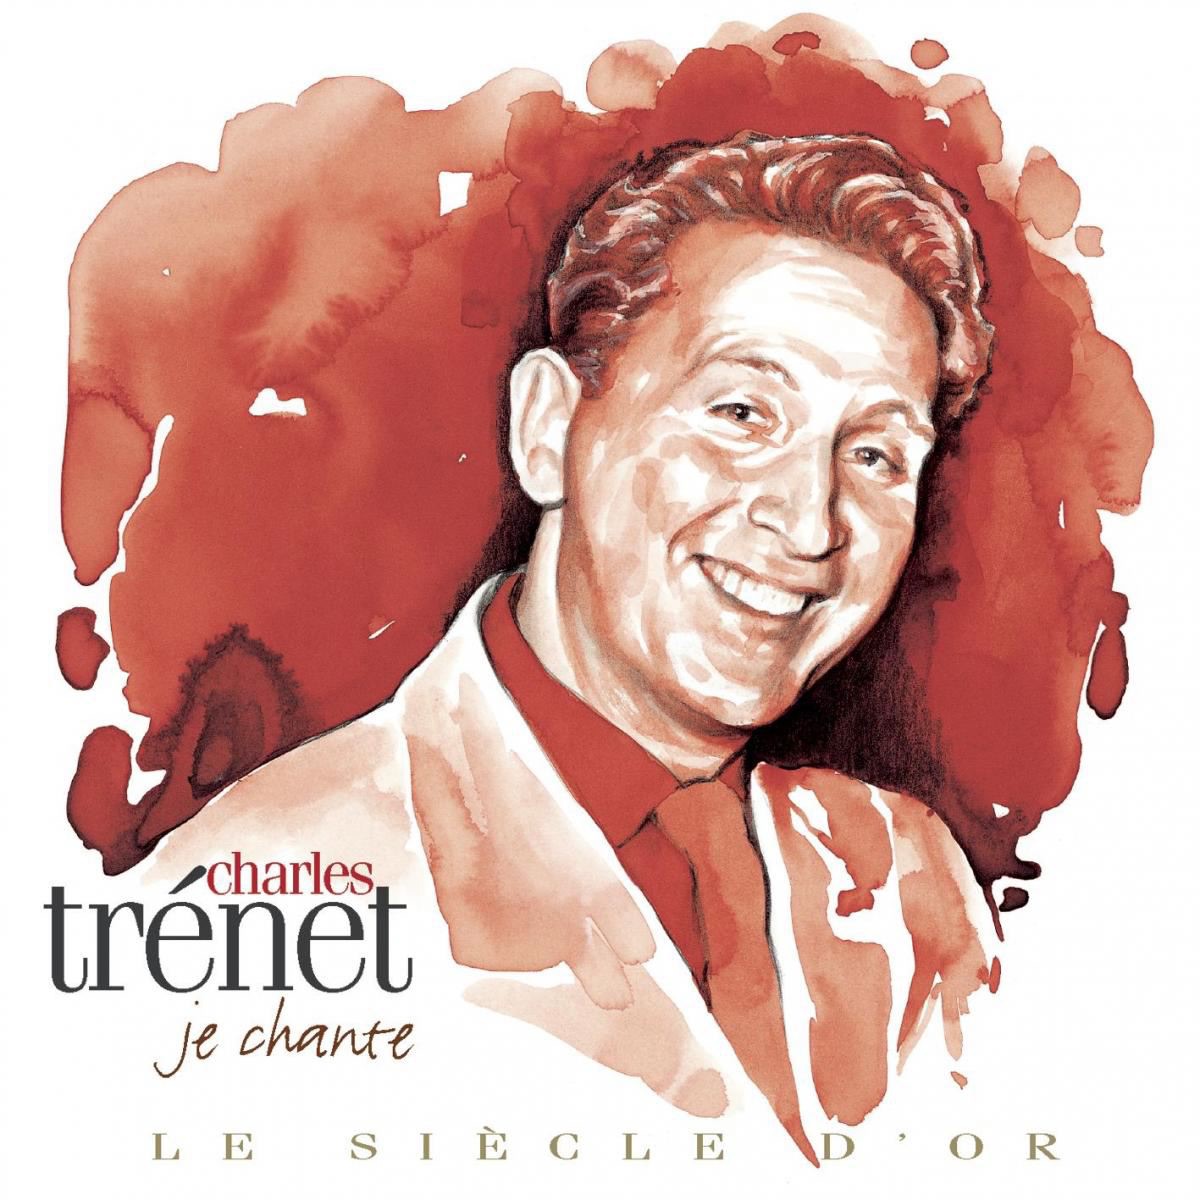 Charles Trenet: Le siècle d'or by Charles Trenet on Apple Music